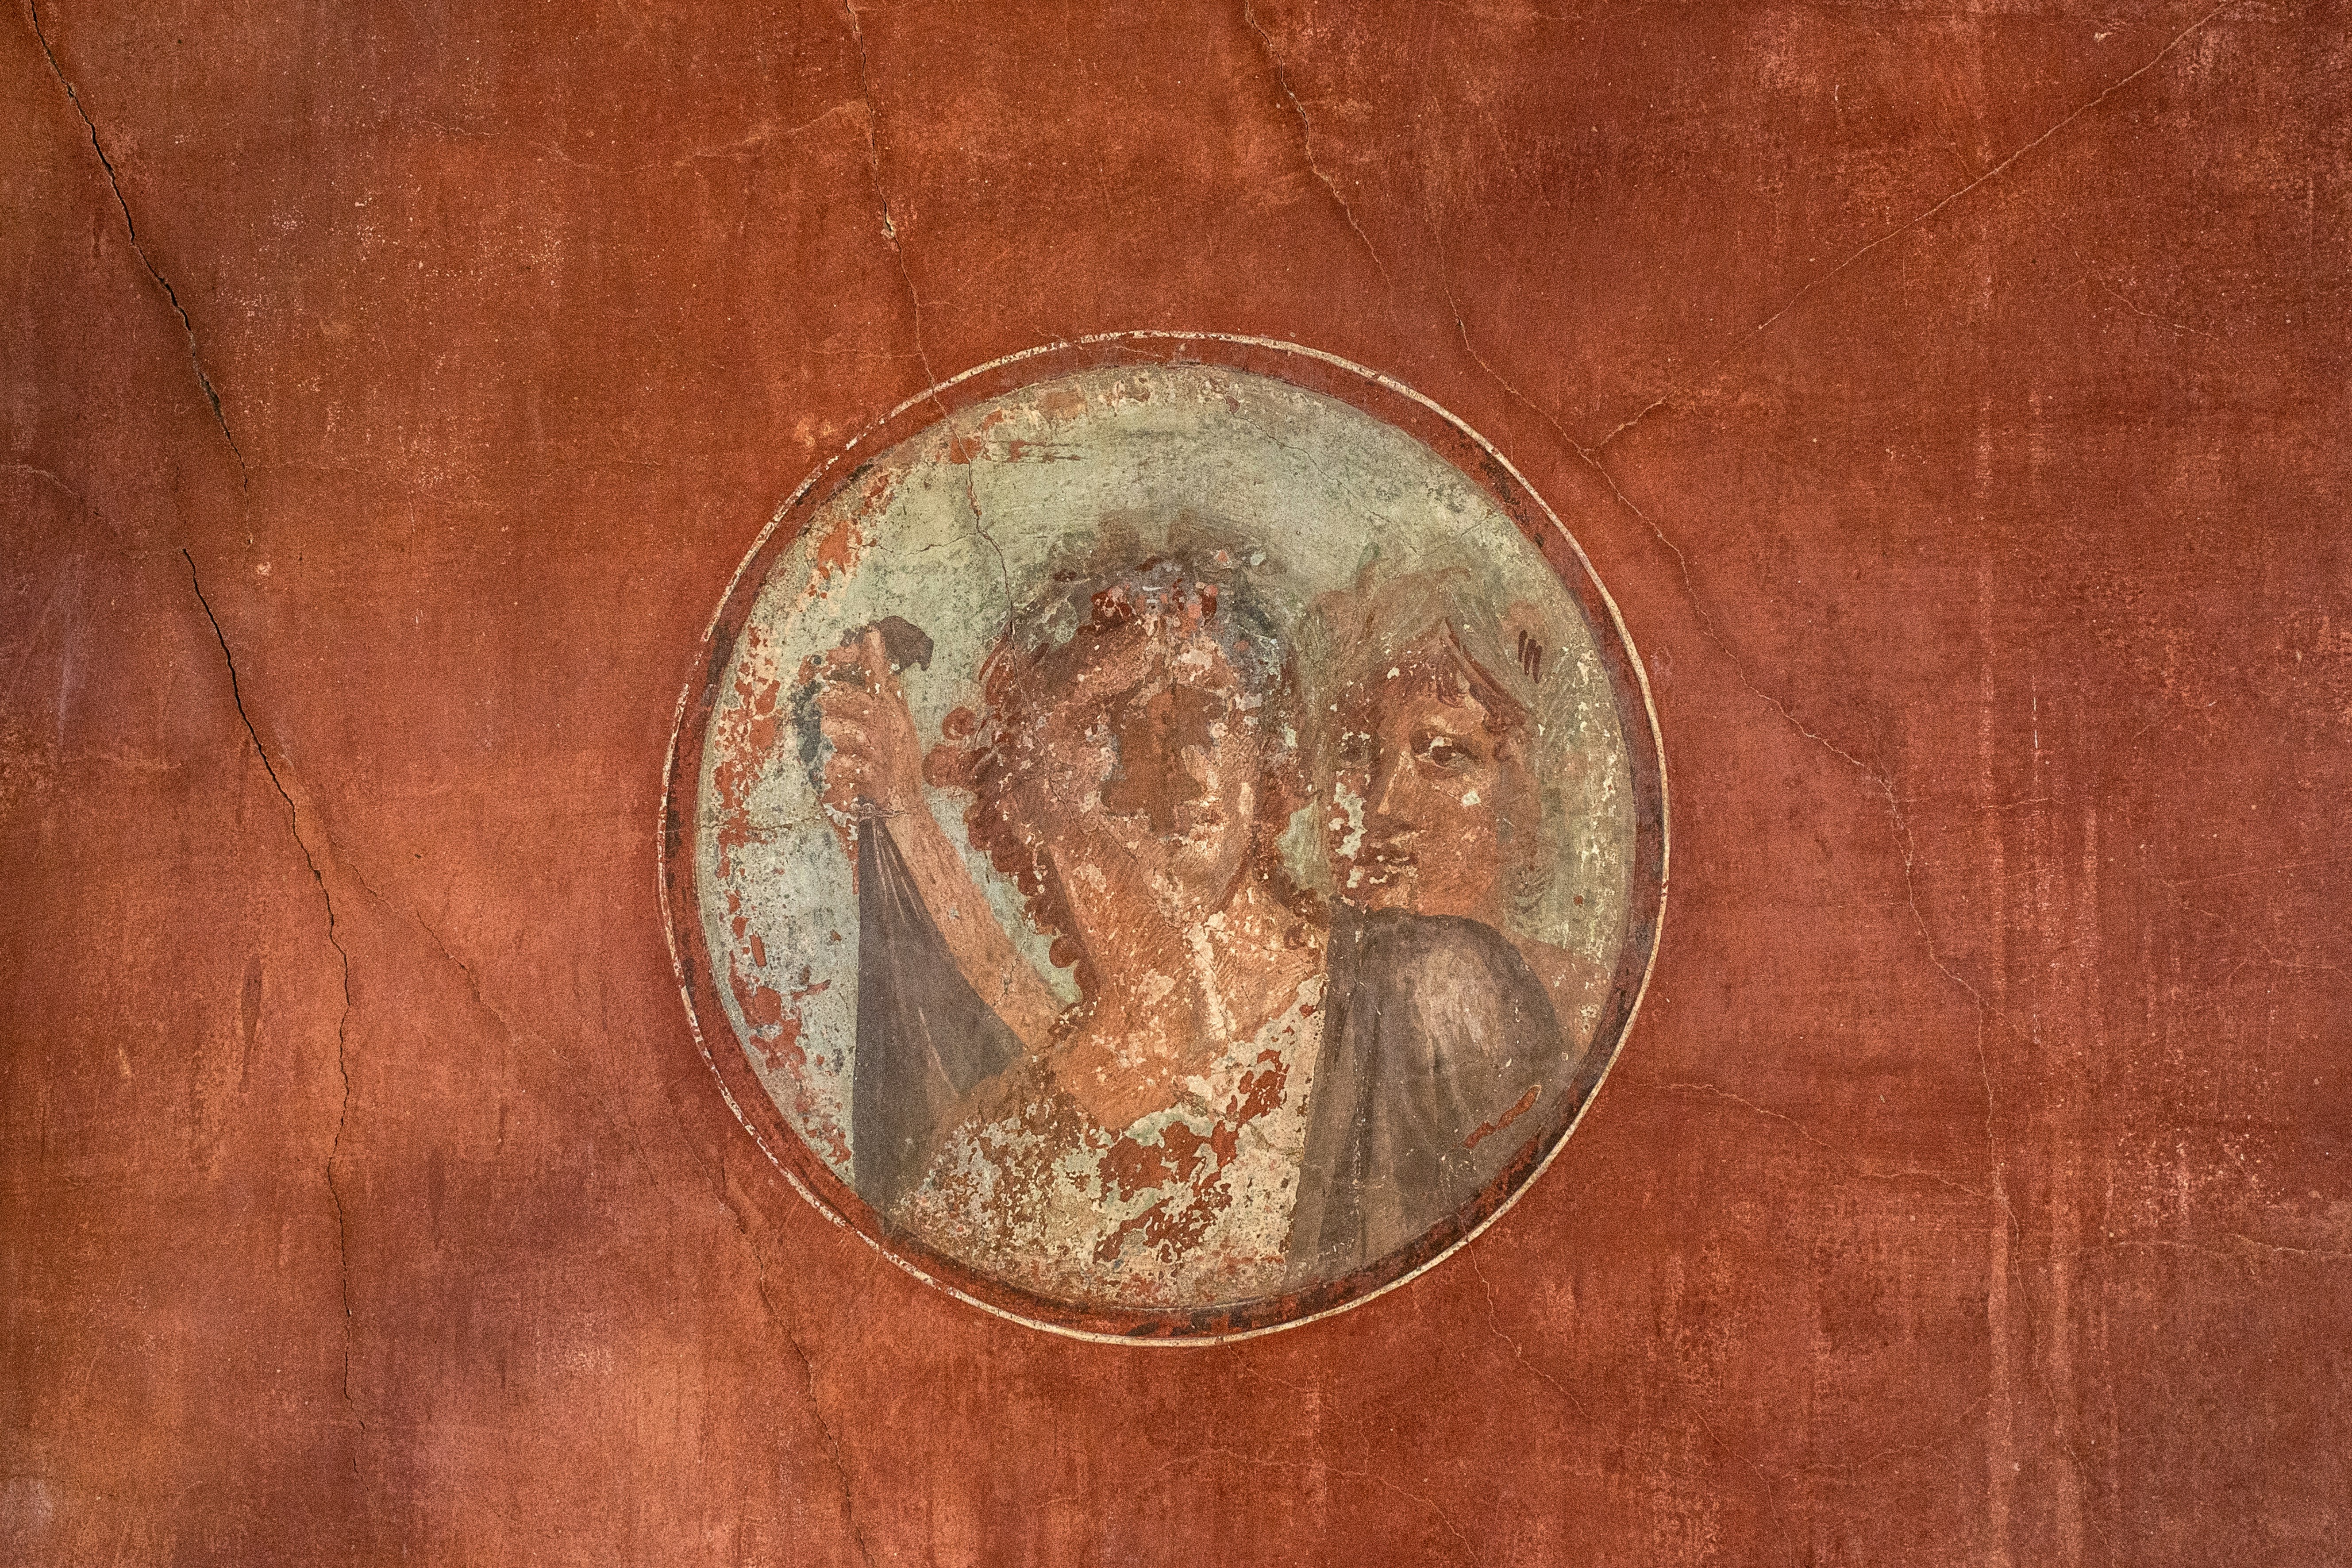 Ancient Roman fresco depicts the face of a man against a clay wall